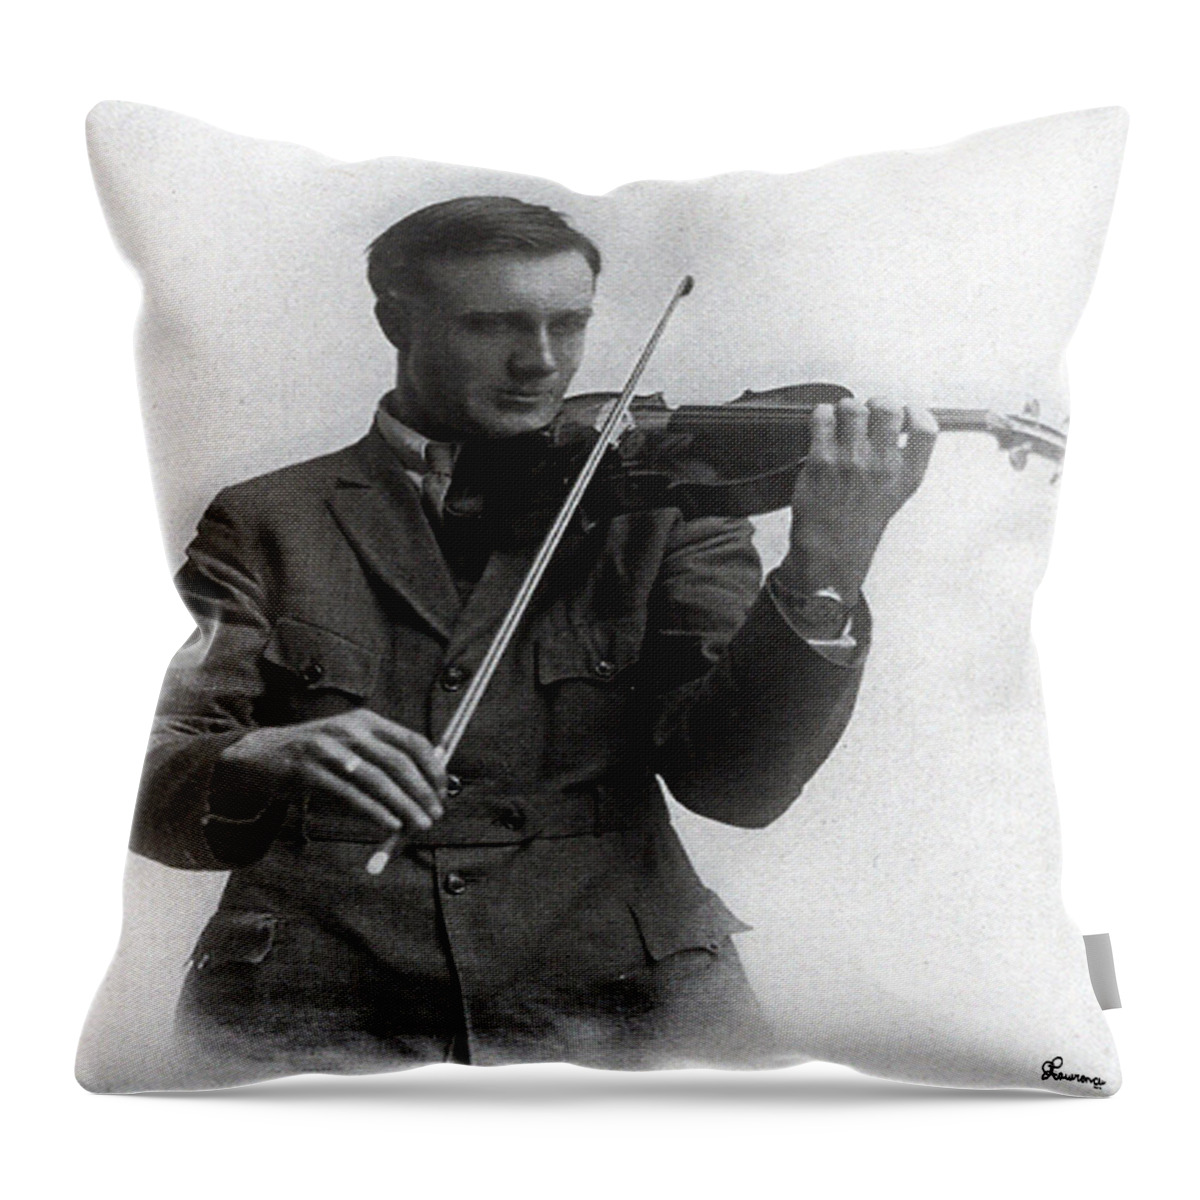 Old Photo Black And White Classic Saskatchewan Pioneers History Fiddle Violin Throw Pillow featuring the photograph Entertainer by Andrea Lawrence